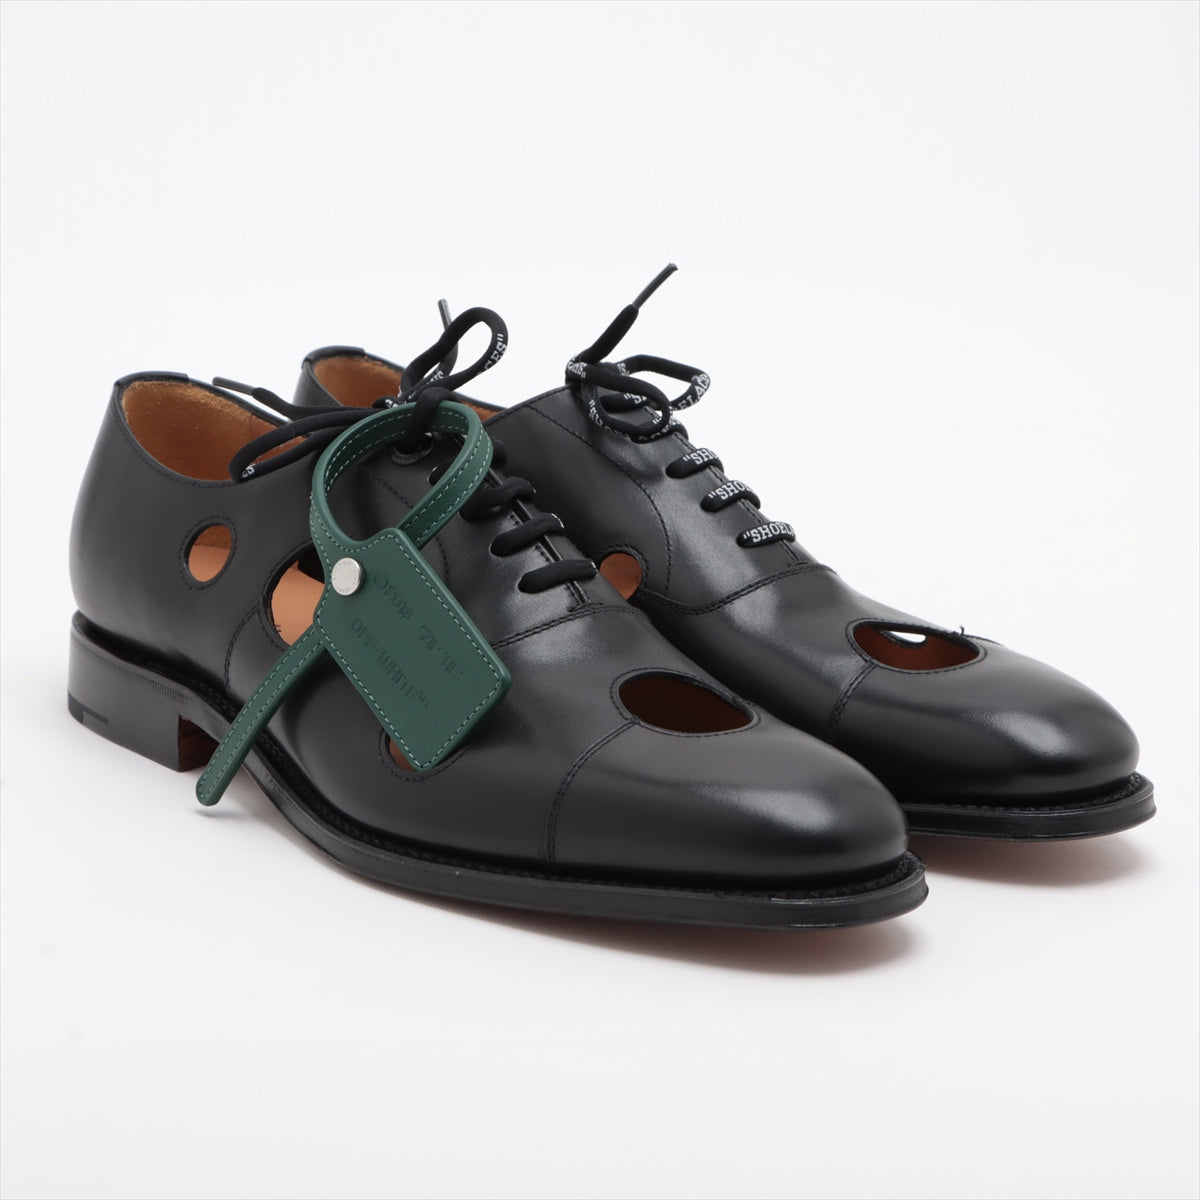 Church x off-white Leather Leather shoes 9 1/2 Men's Black Consulting Meteor Straight tip  Is there a replacement string